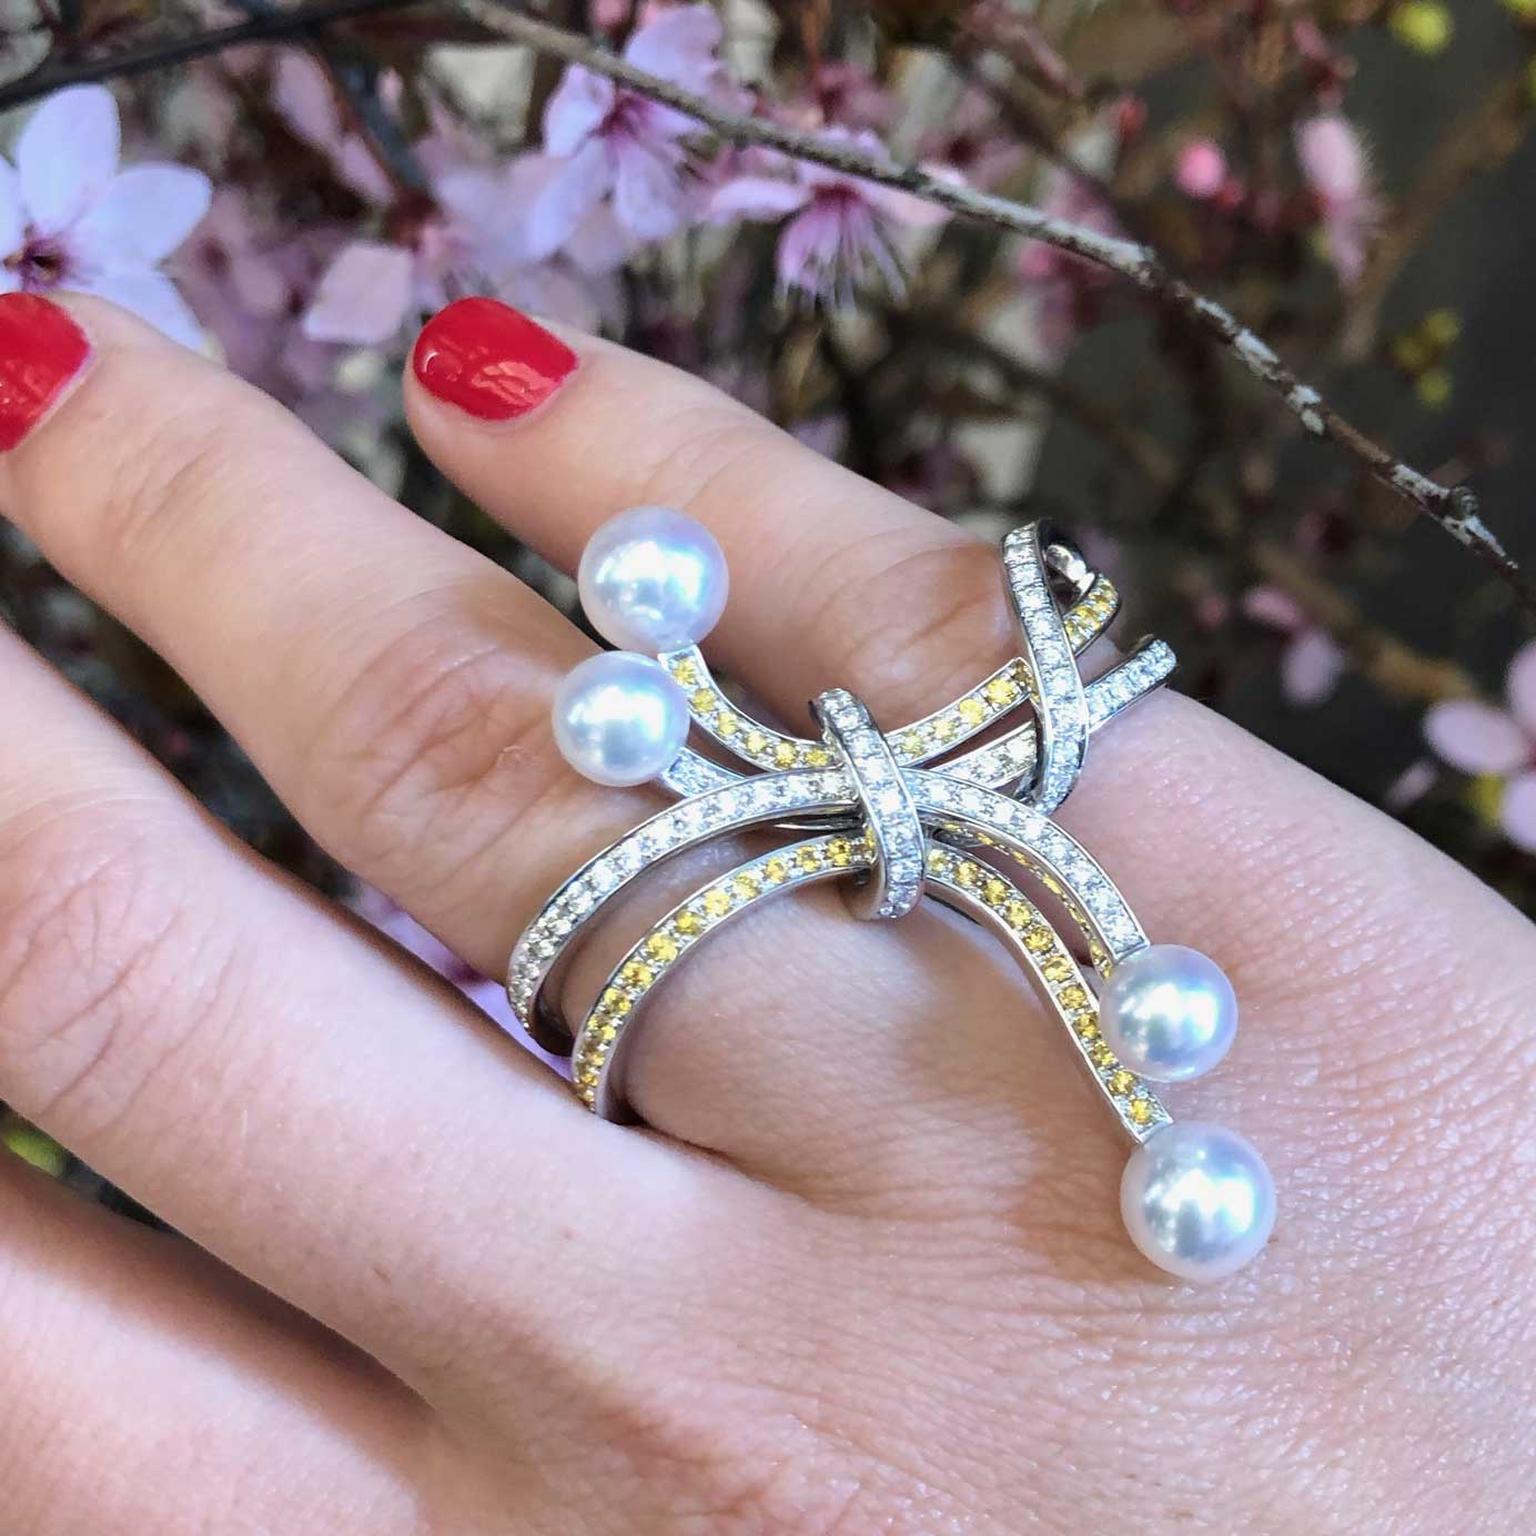 The trend for double and triple rings is on the rise.